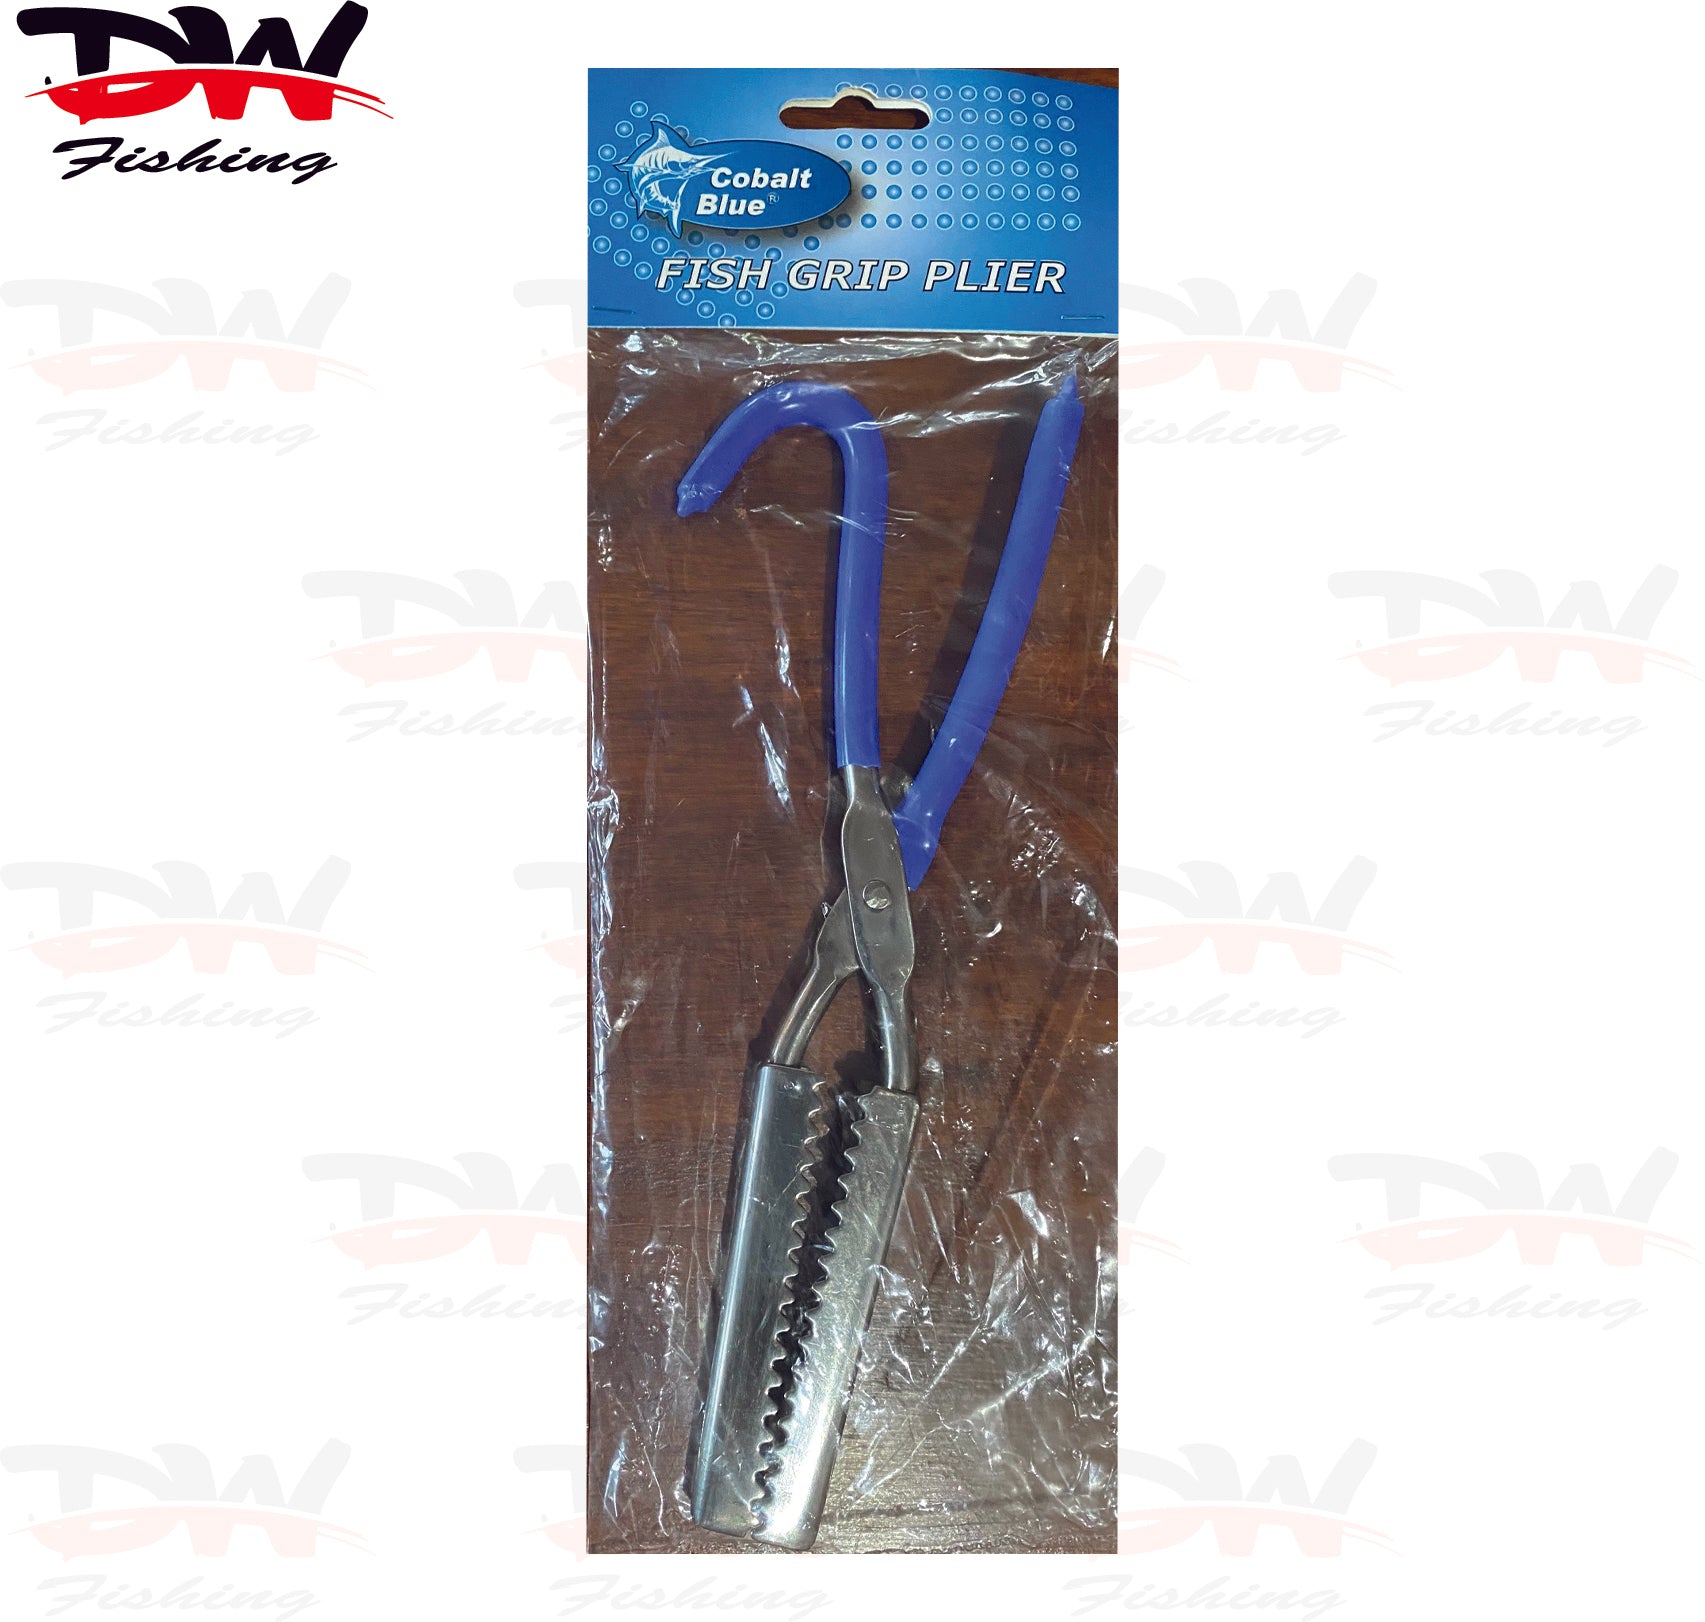 Cobalt Blue Stainless Steel Fish Gripping Pliers